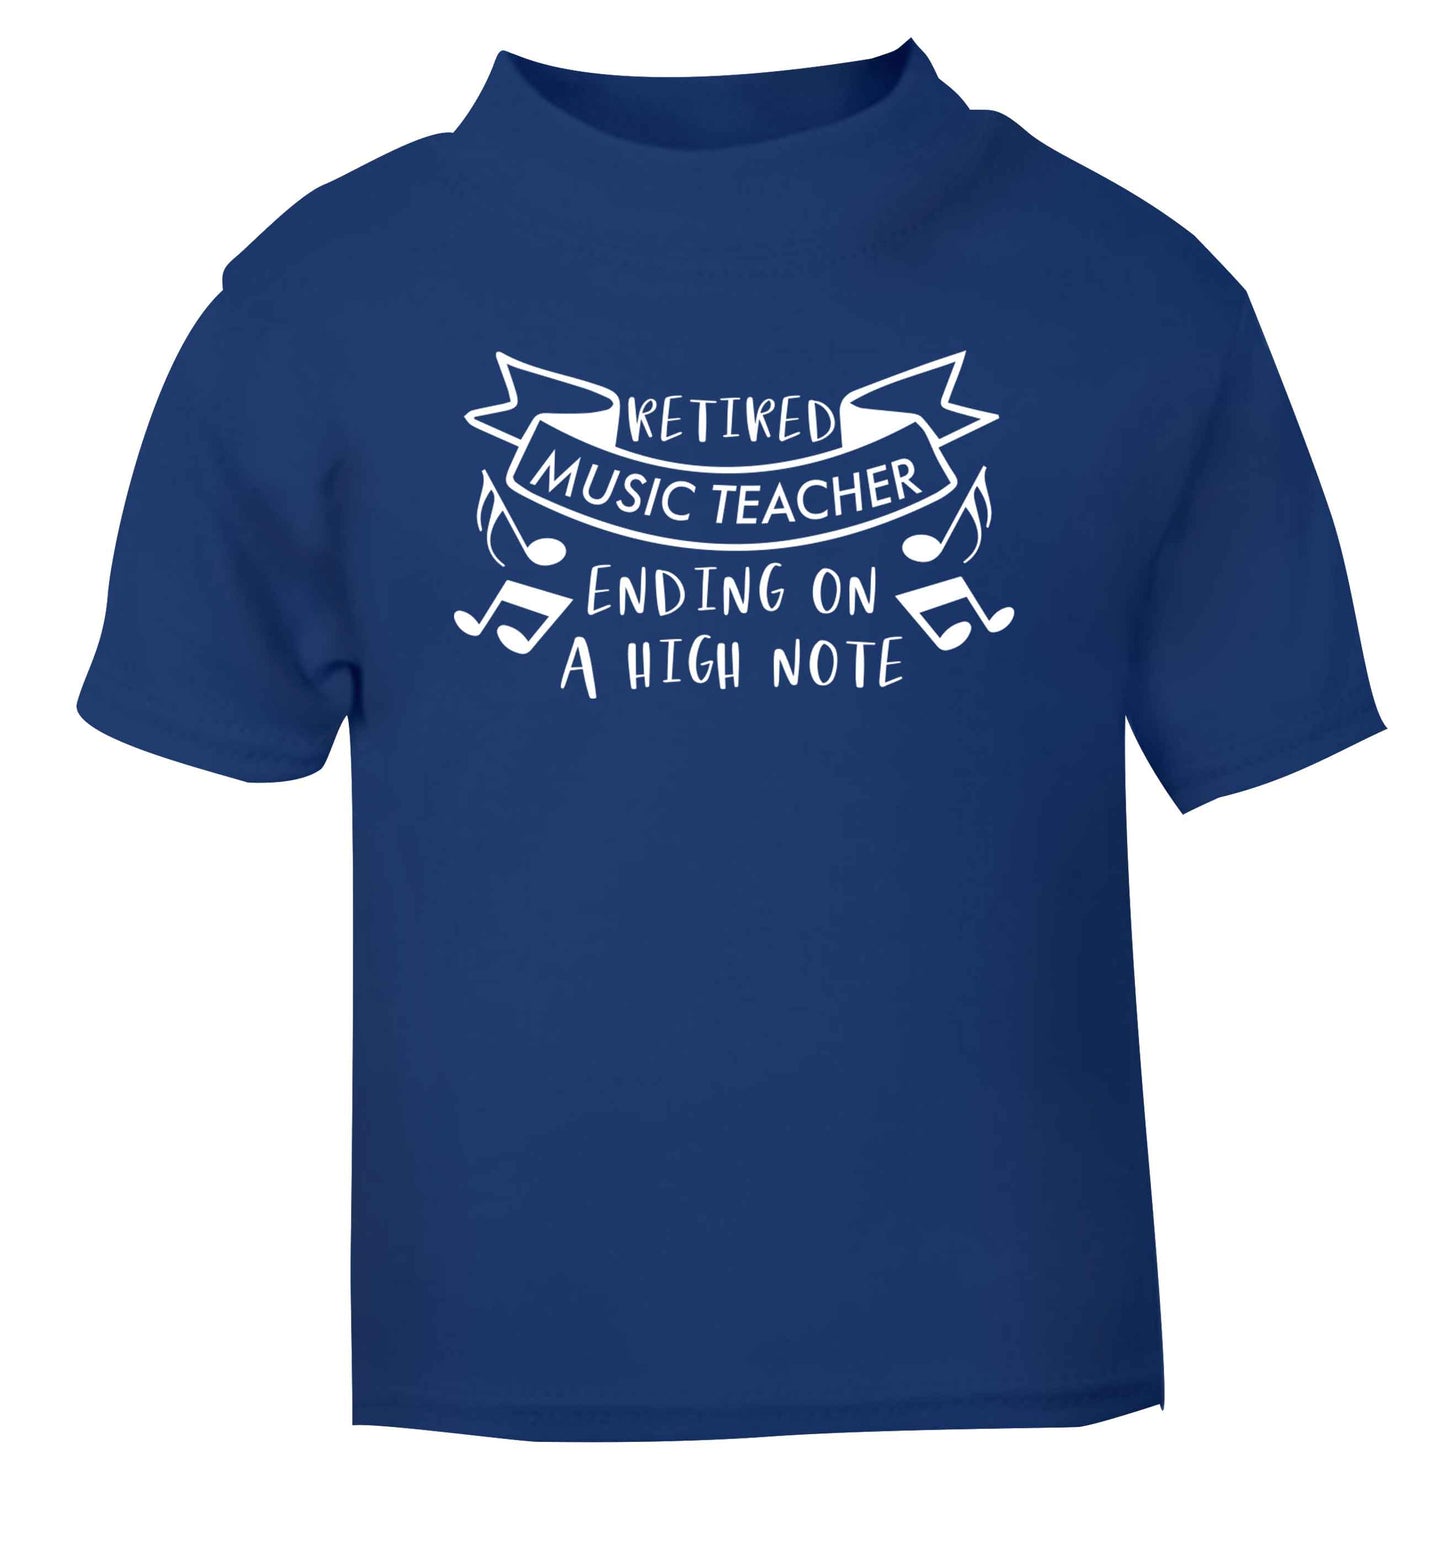 Retired music teacher ending on a high note blue Baby Toddler Tshirt 2 Years